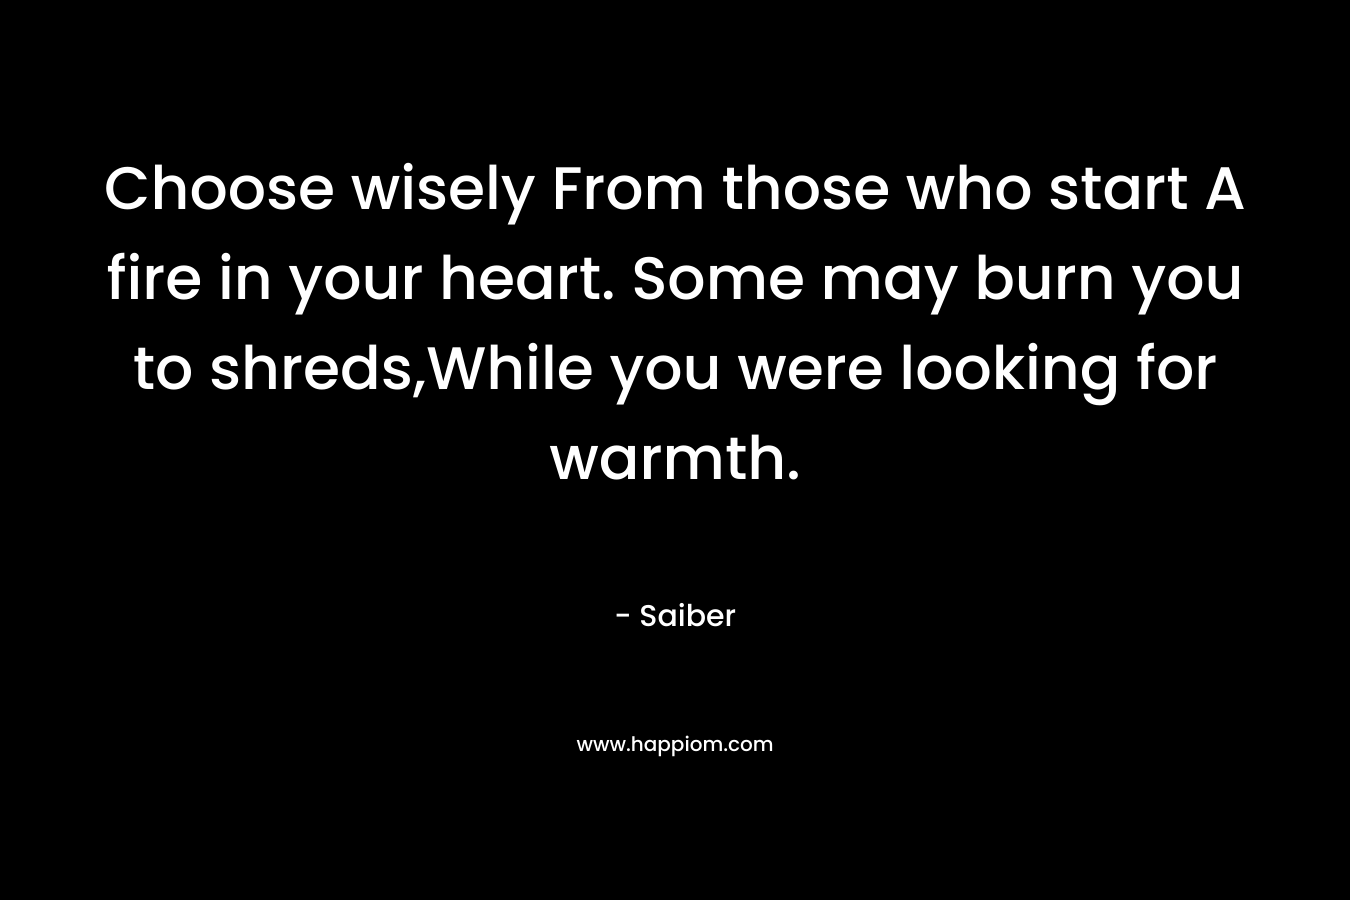 Choose wisely From those who start A fire in your heart. Some may burn you to shreds,While you were looking for warmth.